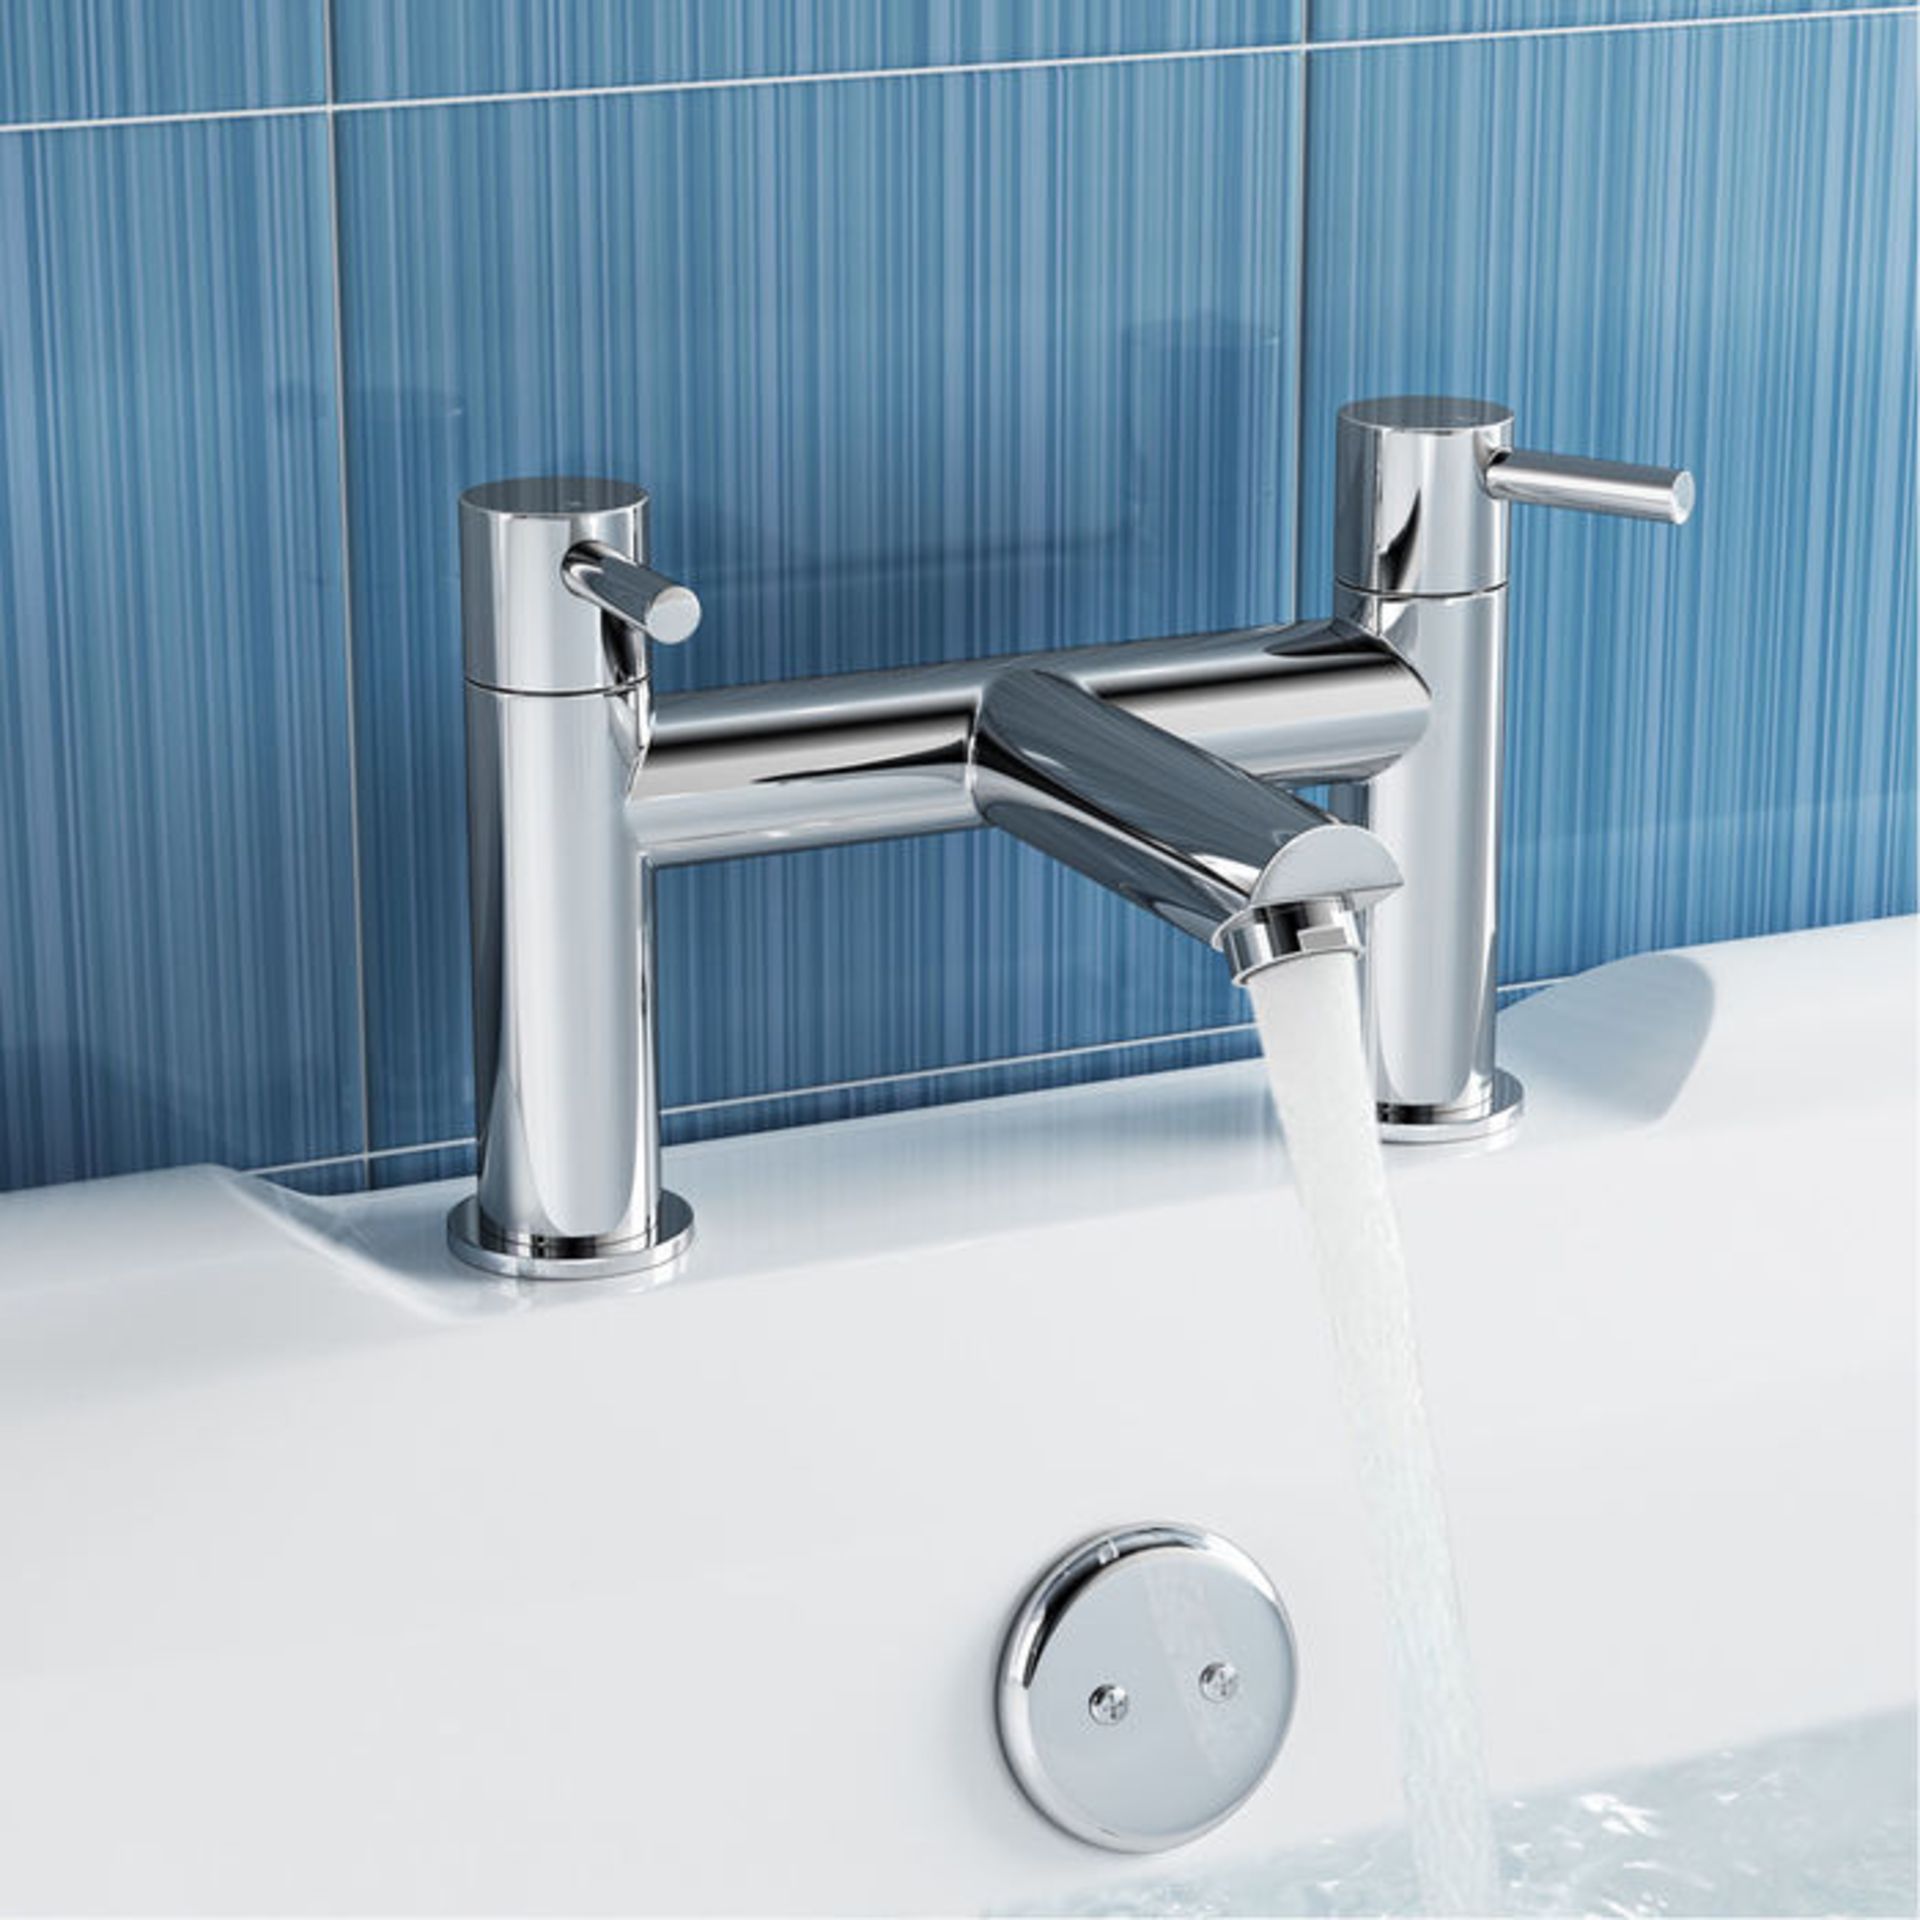 (PJ27) Gladstone II Bath Filler Mixer Tap Chrome Plated Solid Brass 1/4 turn solid brass valve